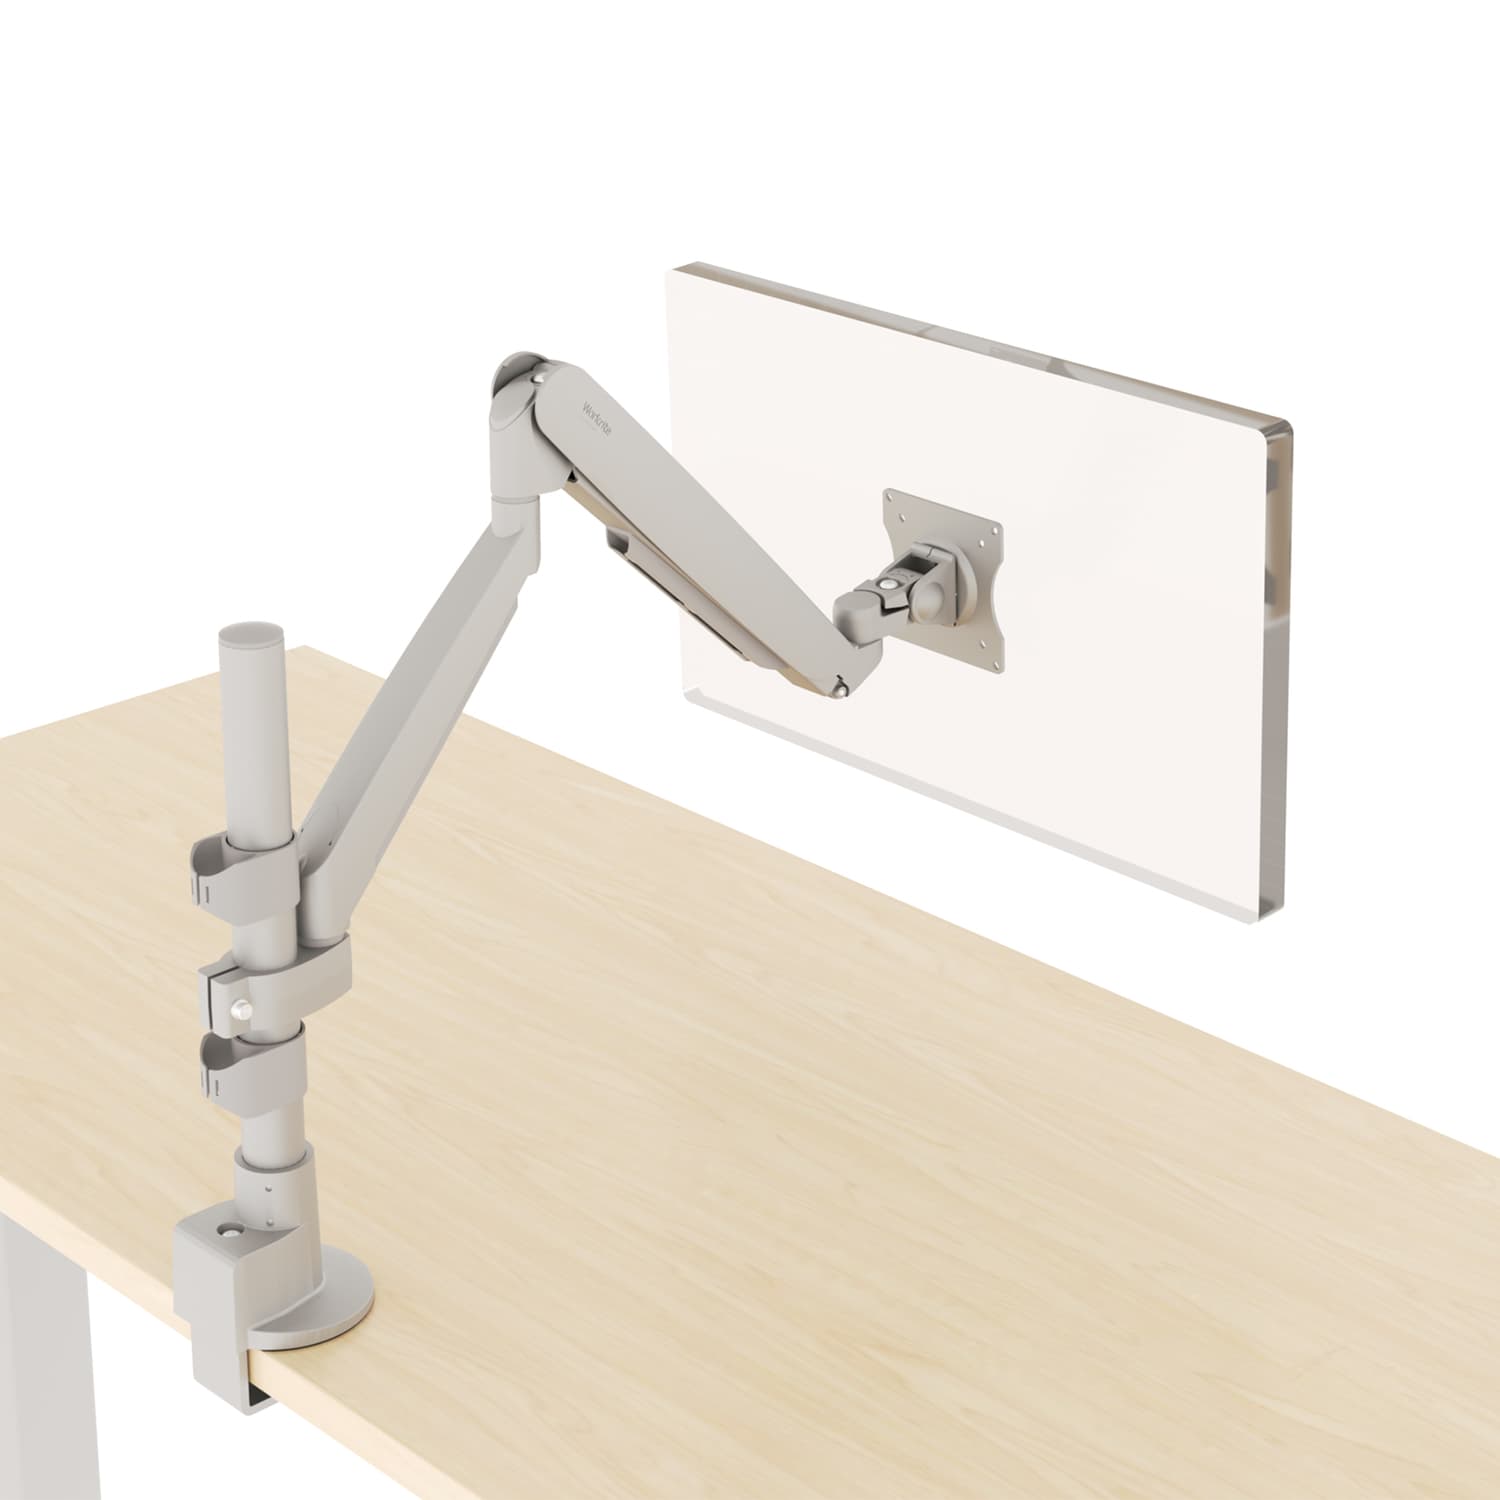 conform-sts-monitor-arm